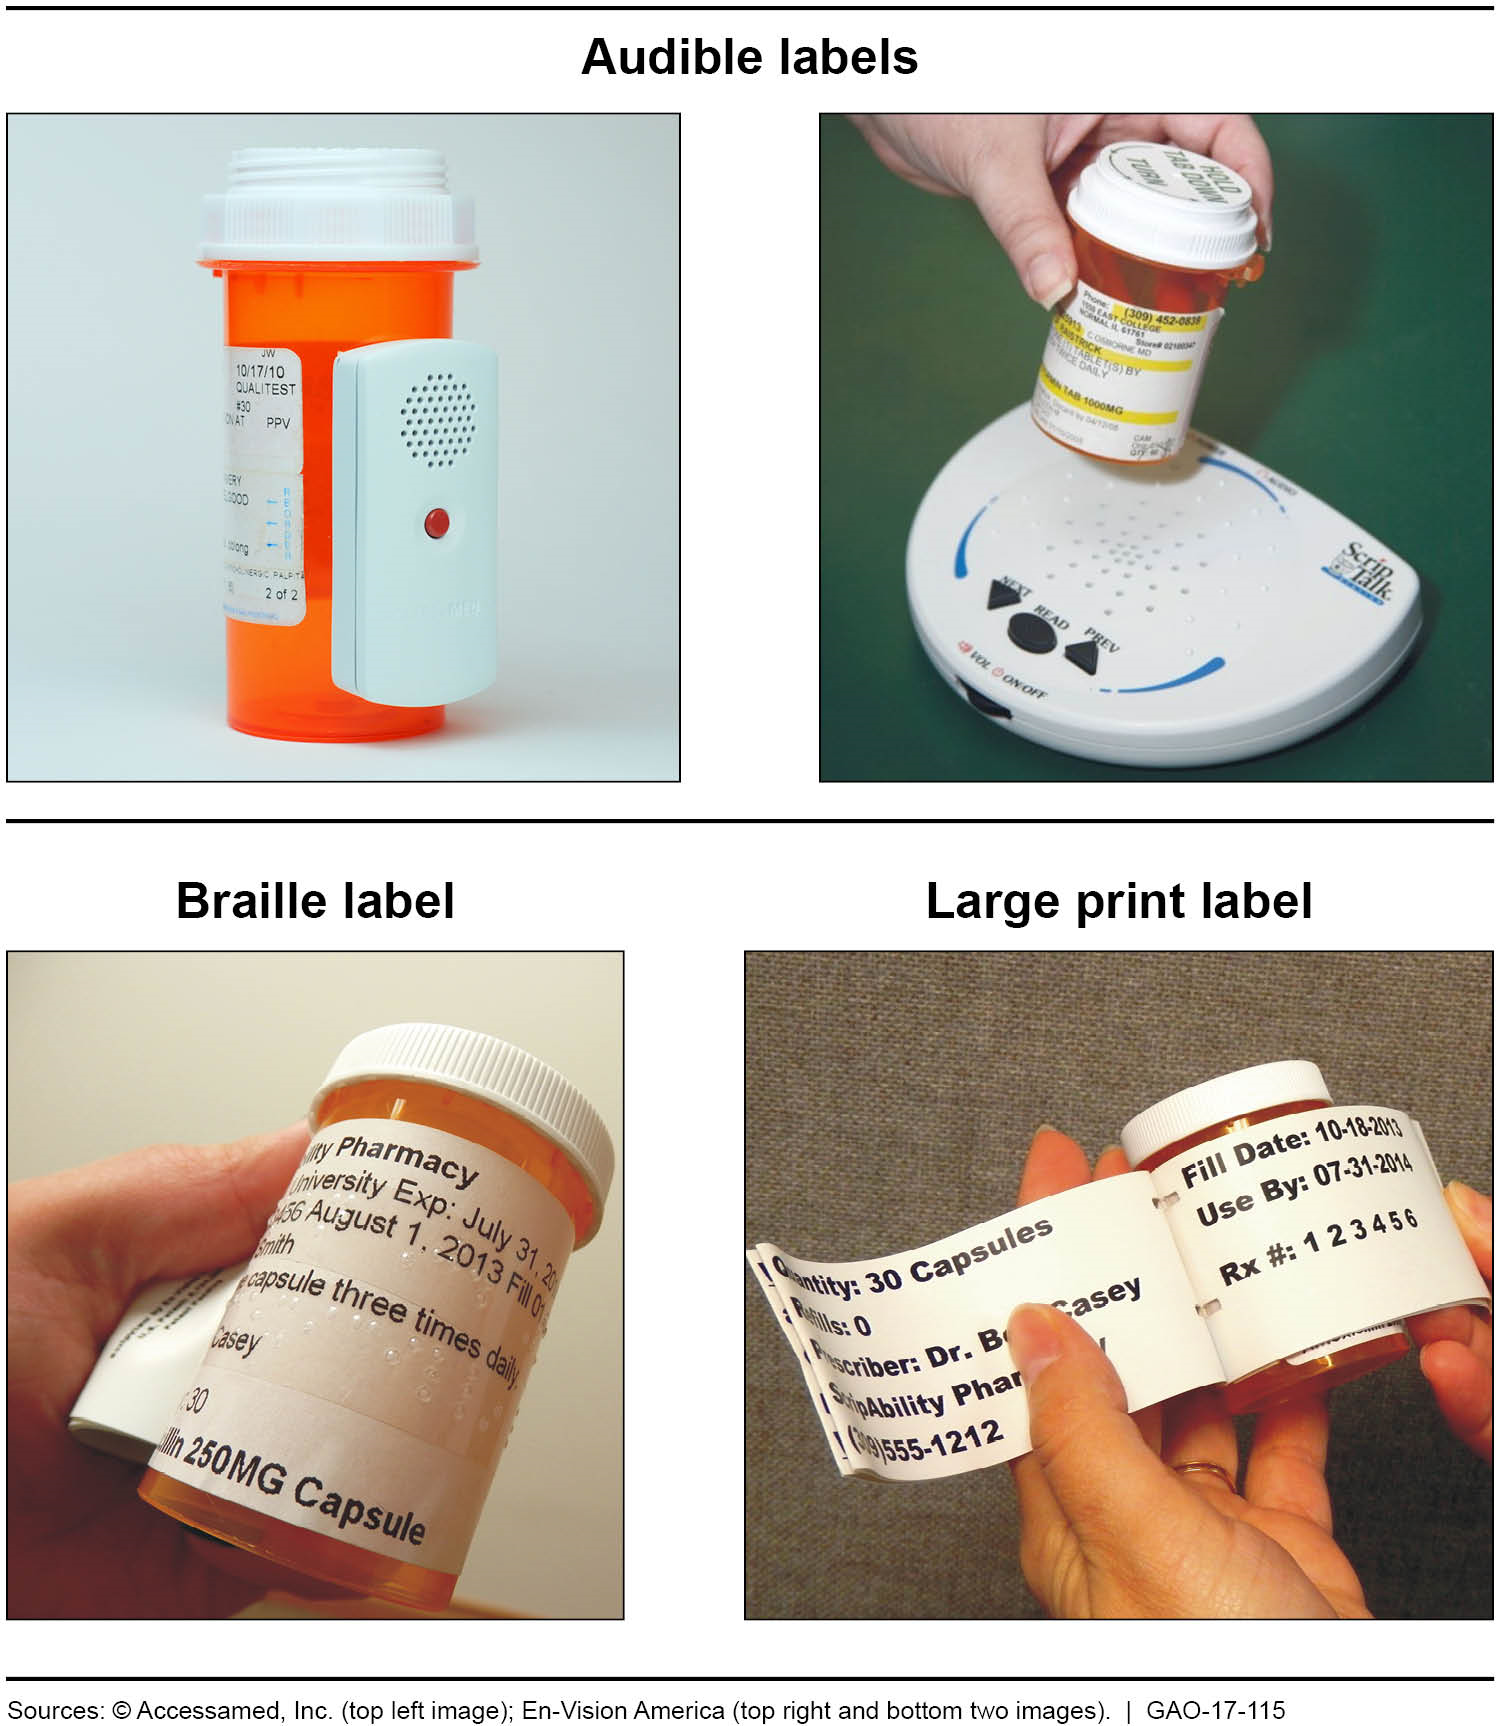 differing kinds of labels for visually impaired or blind